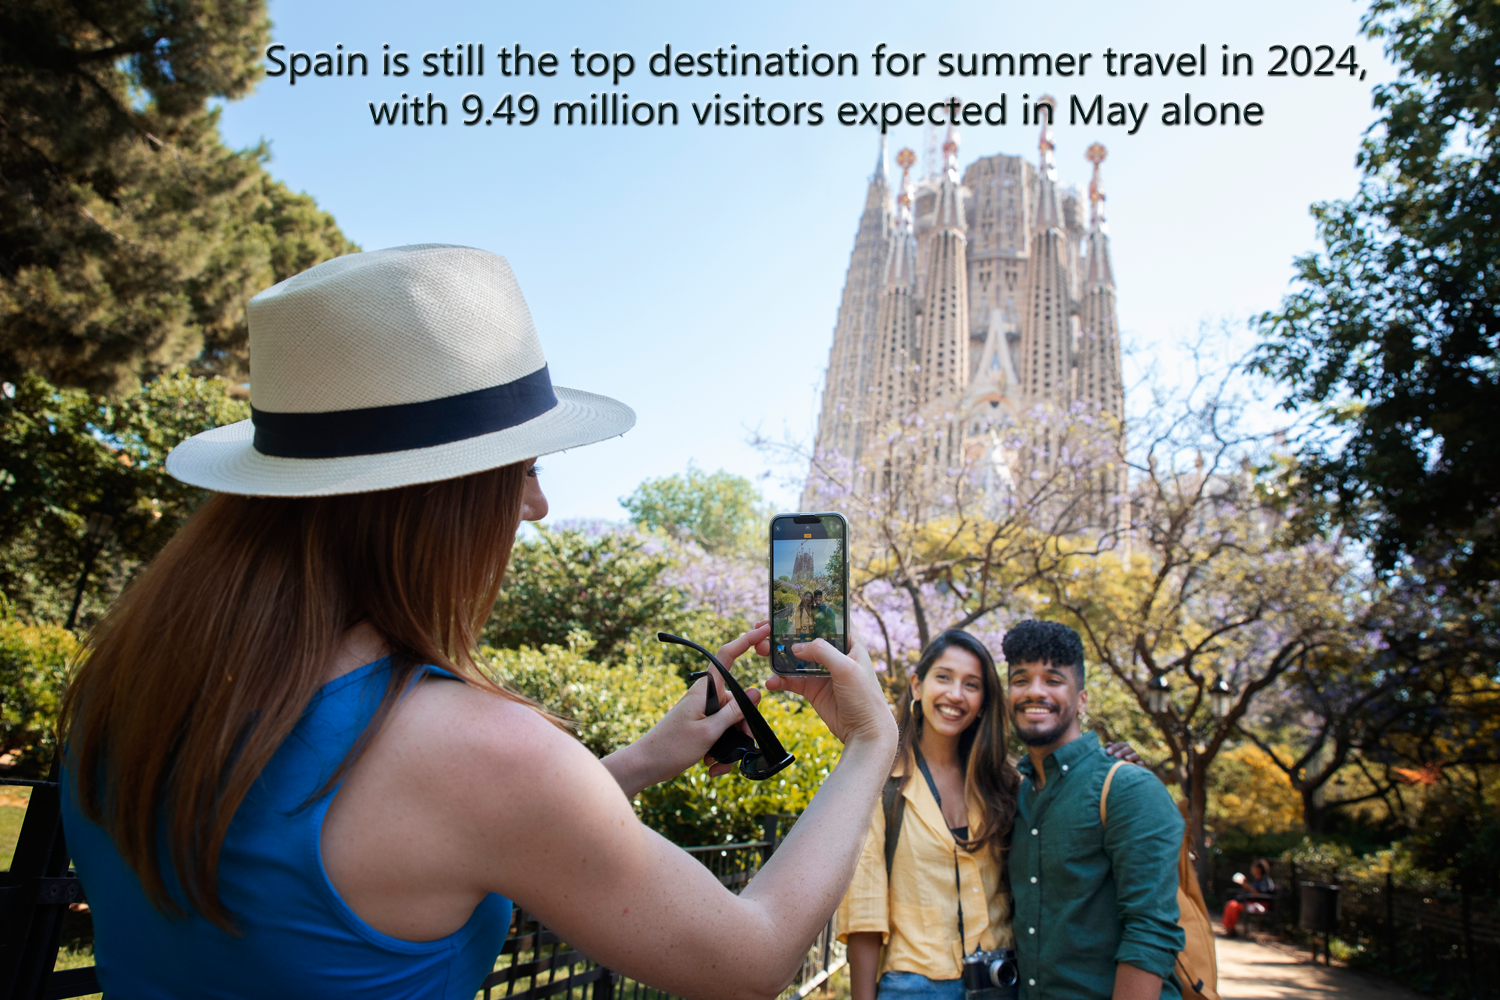 Spain is still the top destination for summer travel in 2024, with 9.49 million visitors expected in May alone.